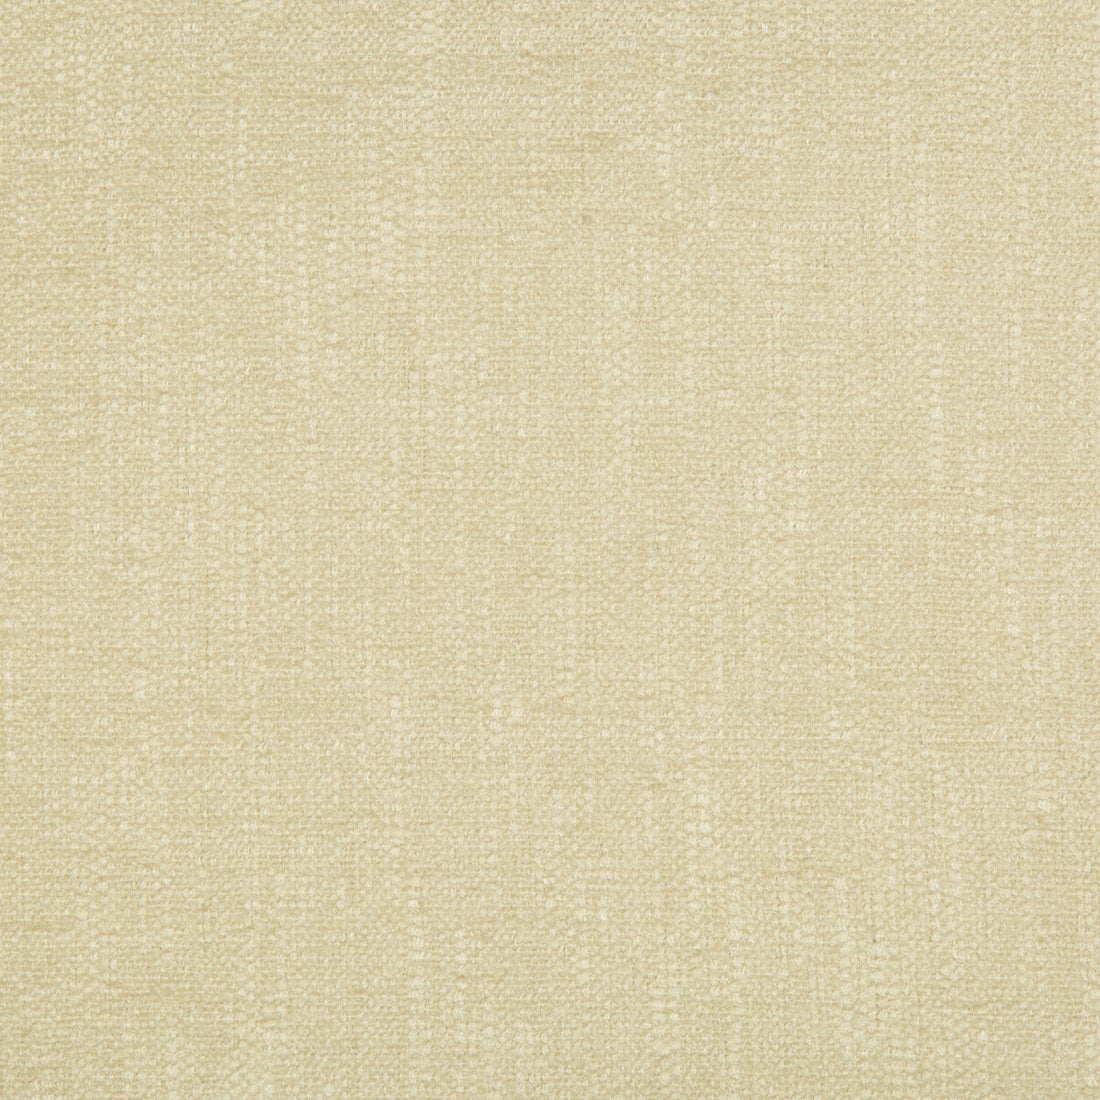 Kravet Smart fabric in 34622-116 color - pattern 34622.116.0 - by Kravet Smart in the Performance Crypton Home collection